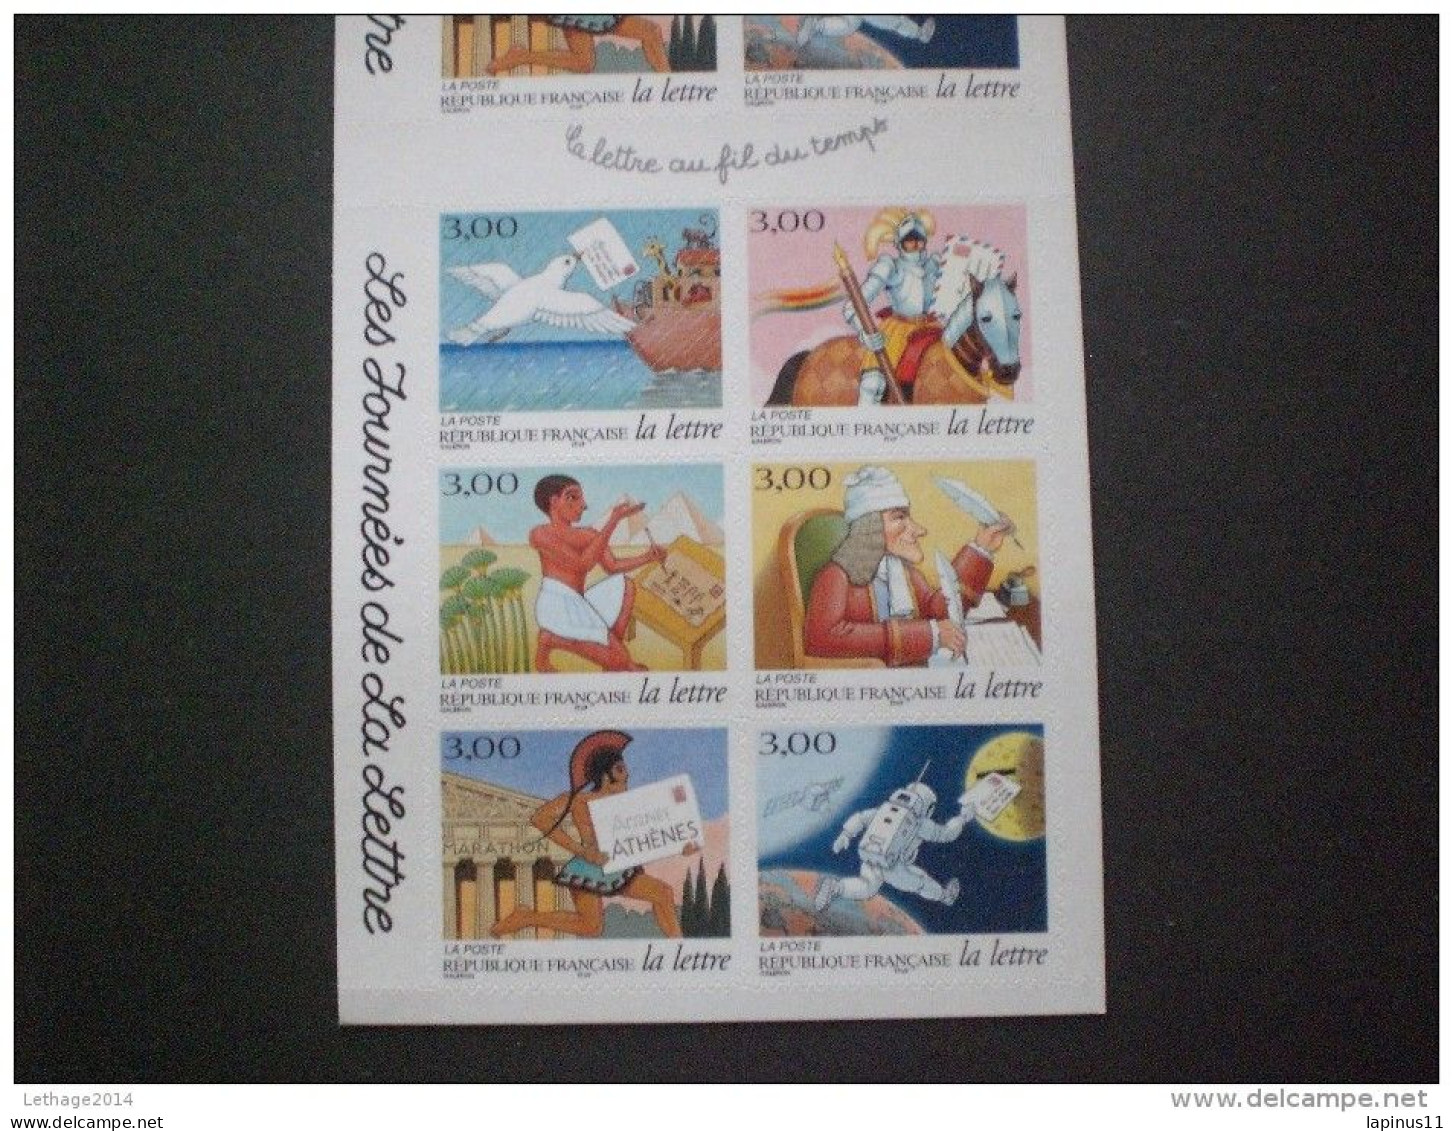 STAMPS France FRANCE CARNETS 1998 Postal Communication Through Times - Self-adhesive - Carnets